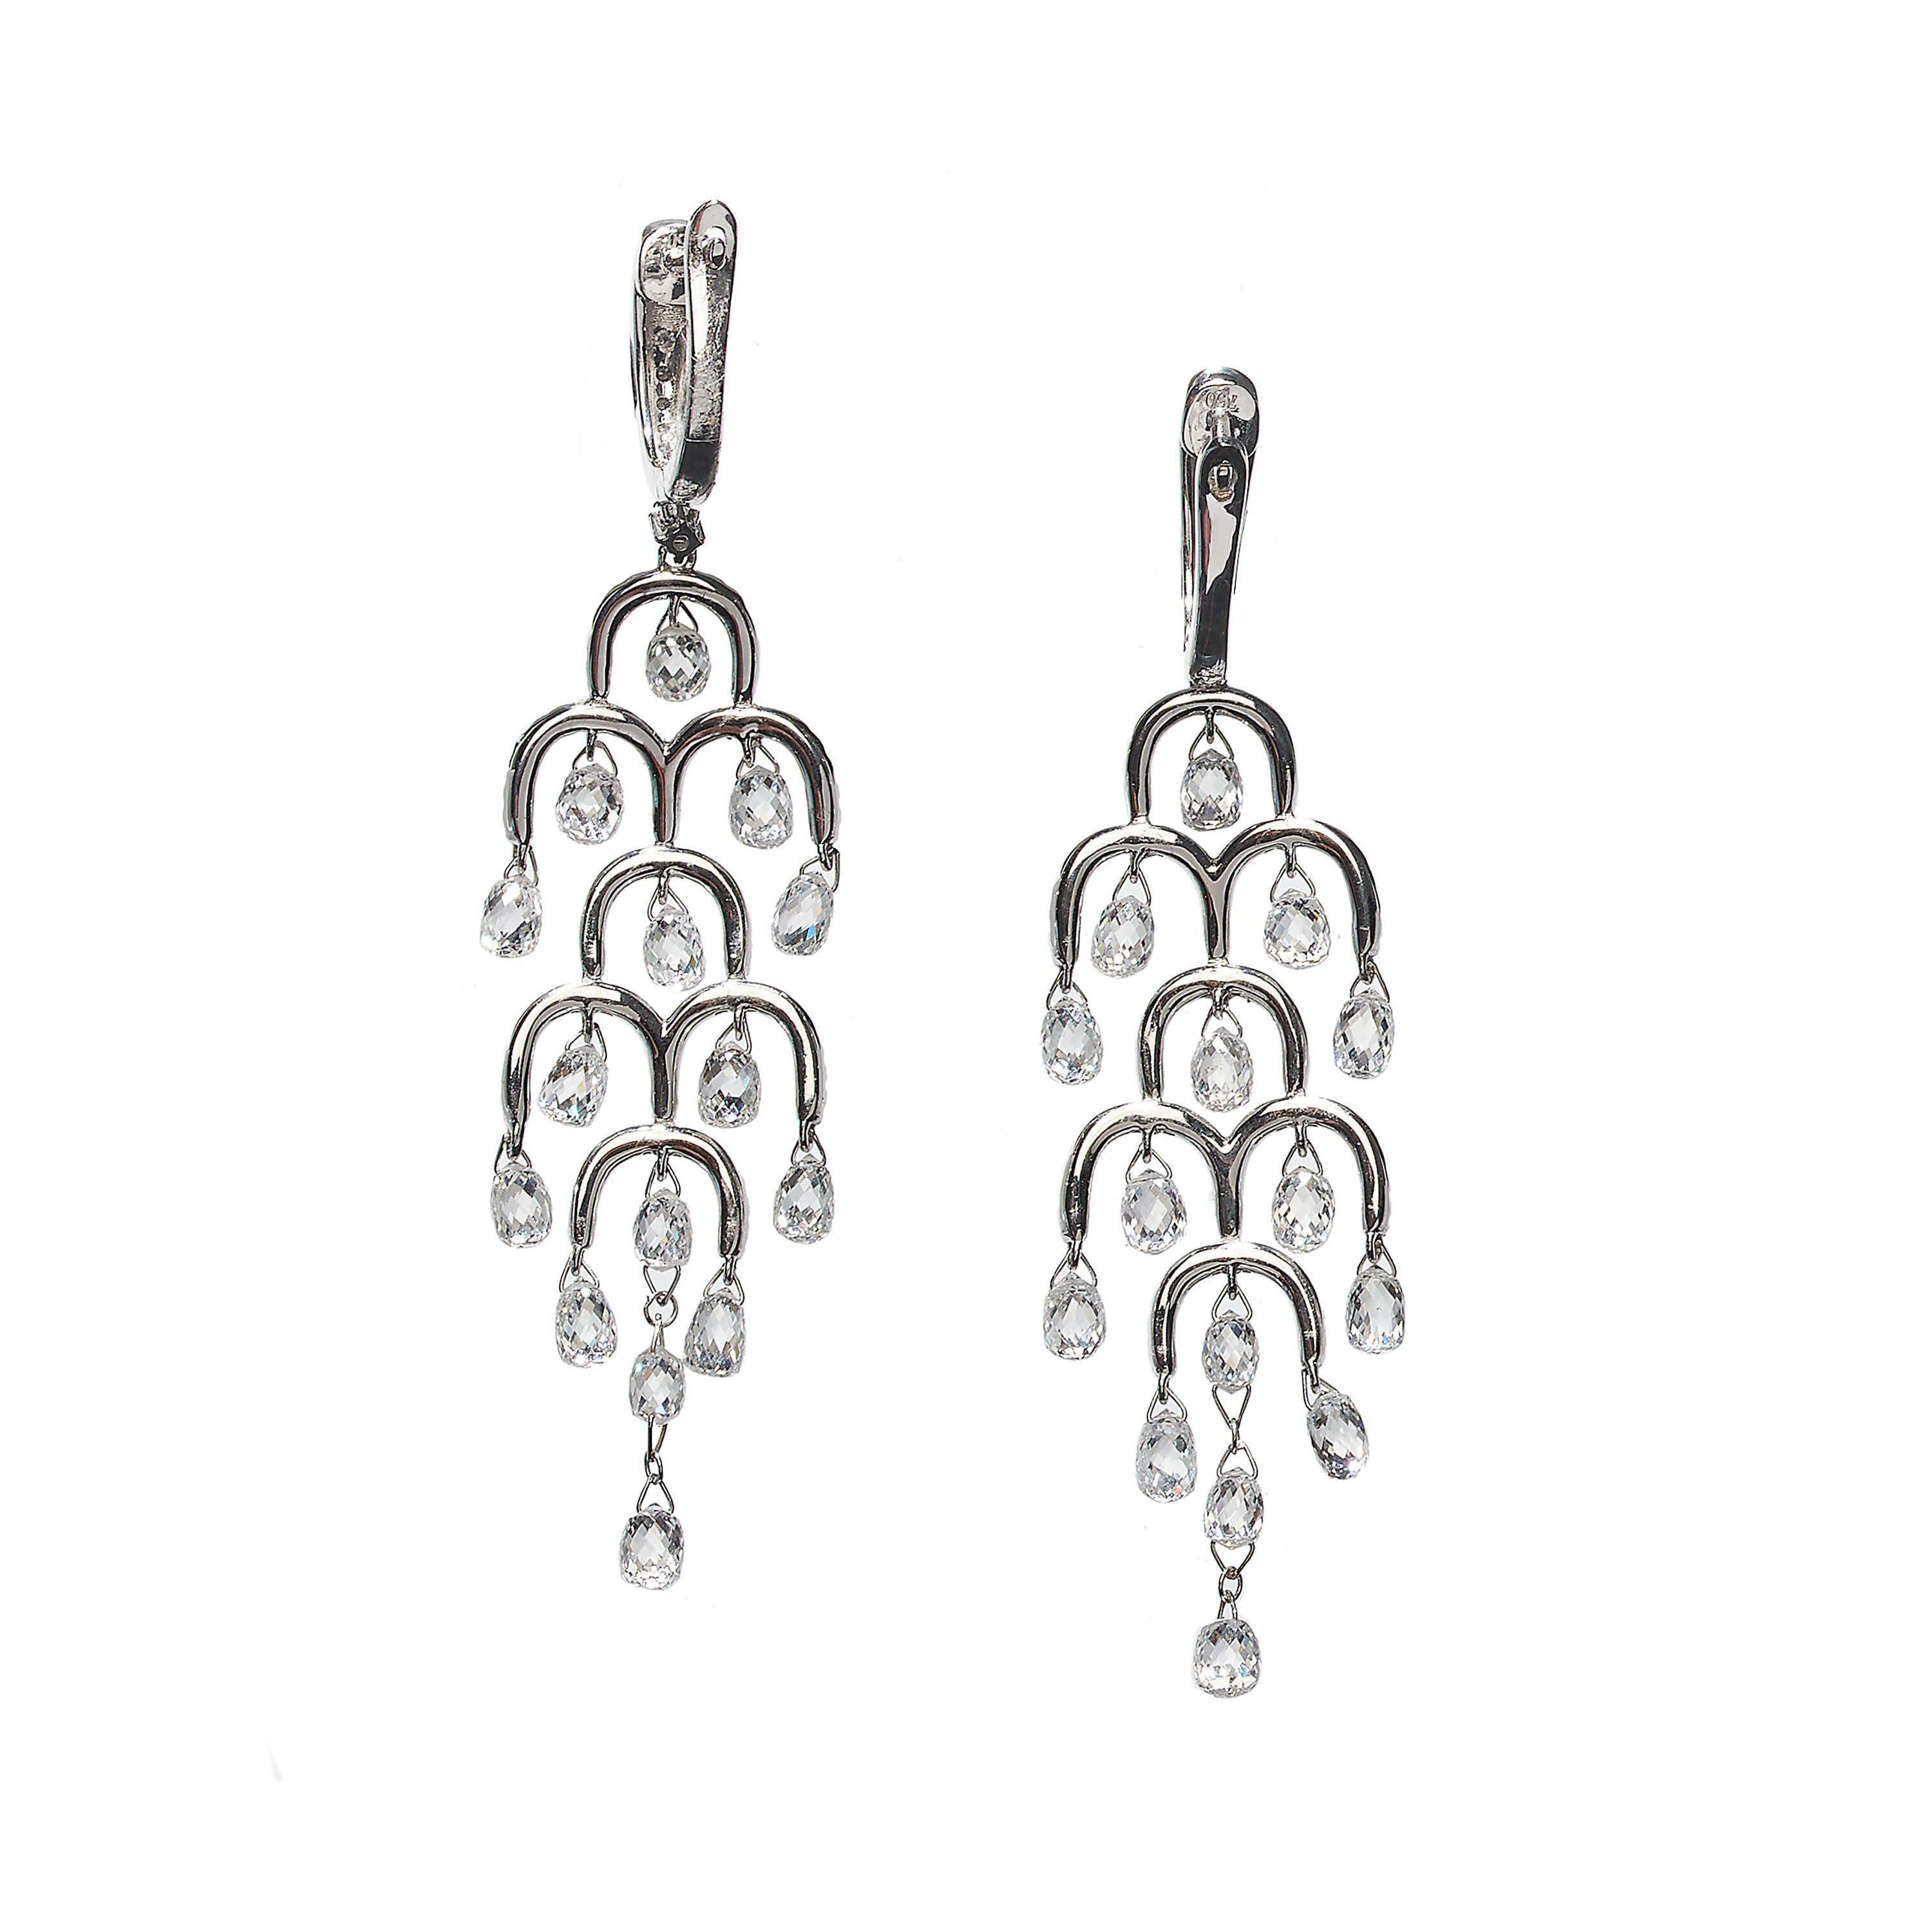 A pair of modern briolette diamond and white gold drop earrings, with round brilliant-cut diamond micro pavé set tops, with five rows of alternating, single and double arches, set with round brilliant-cut diamonds, suspending briolette-cut diamond